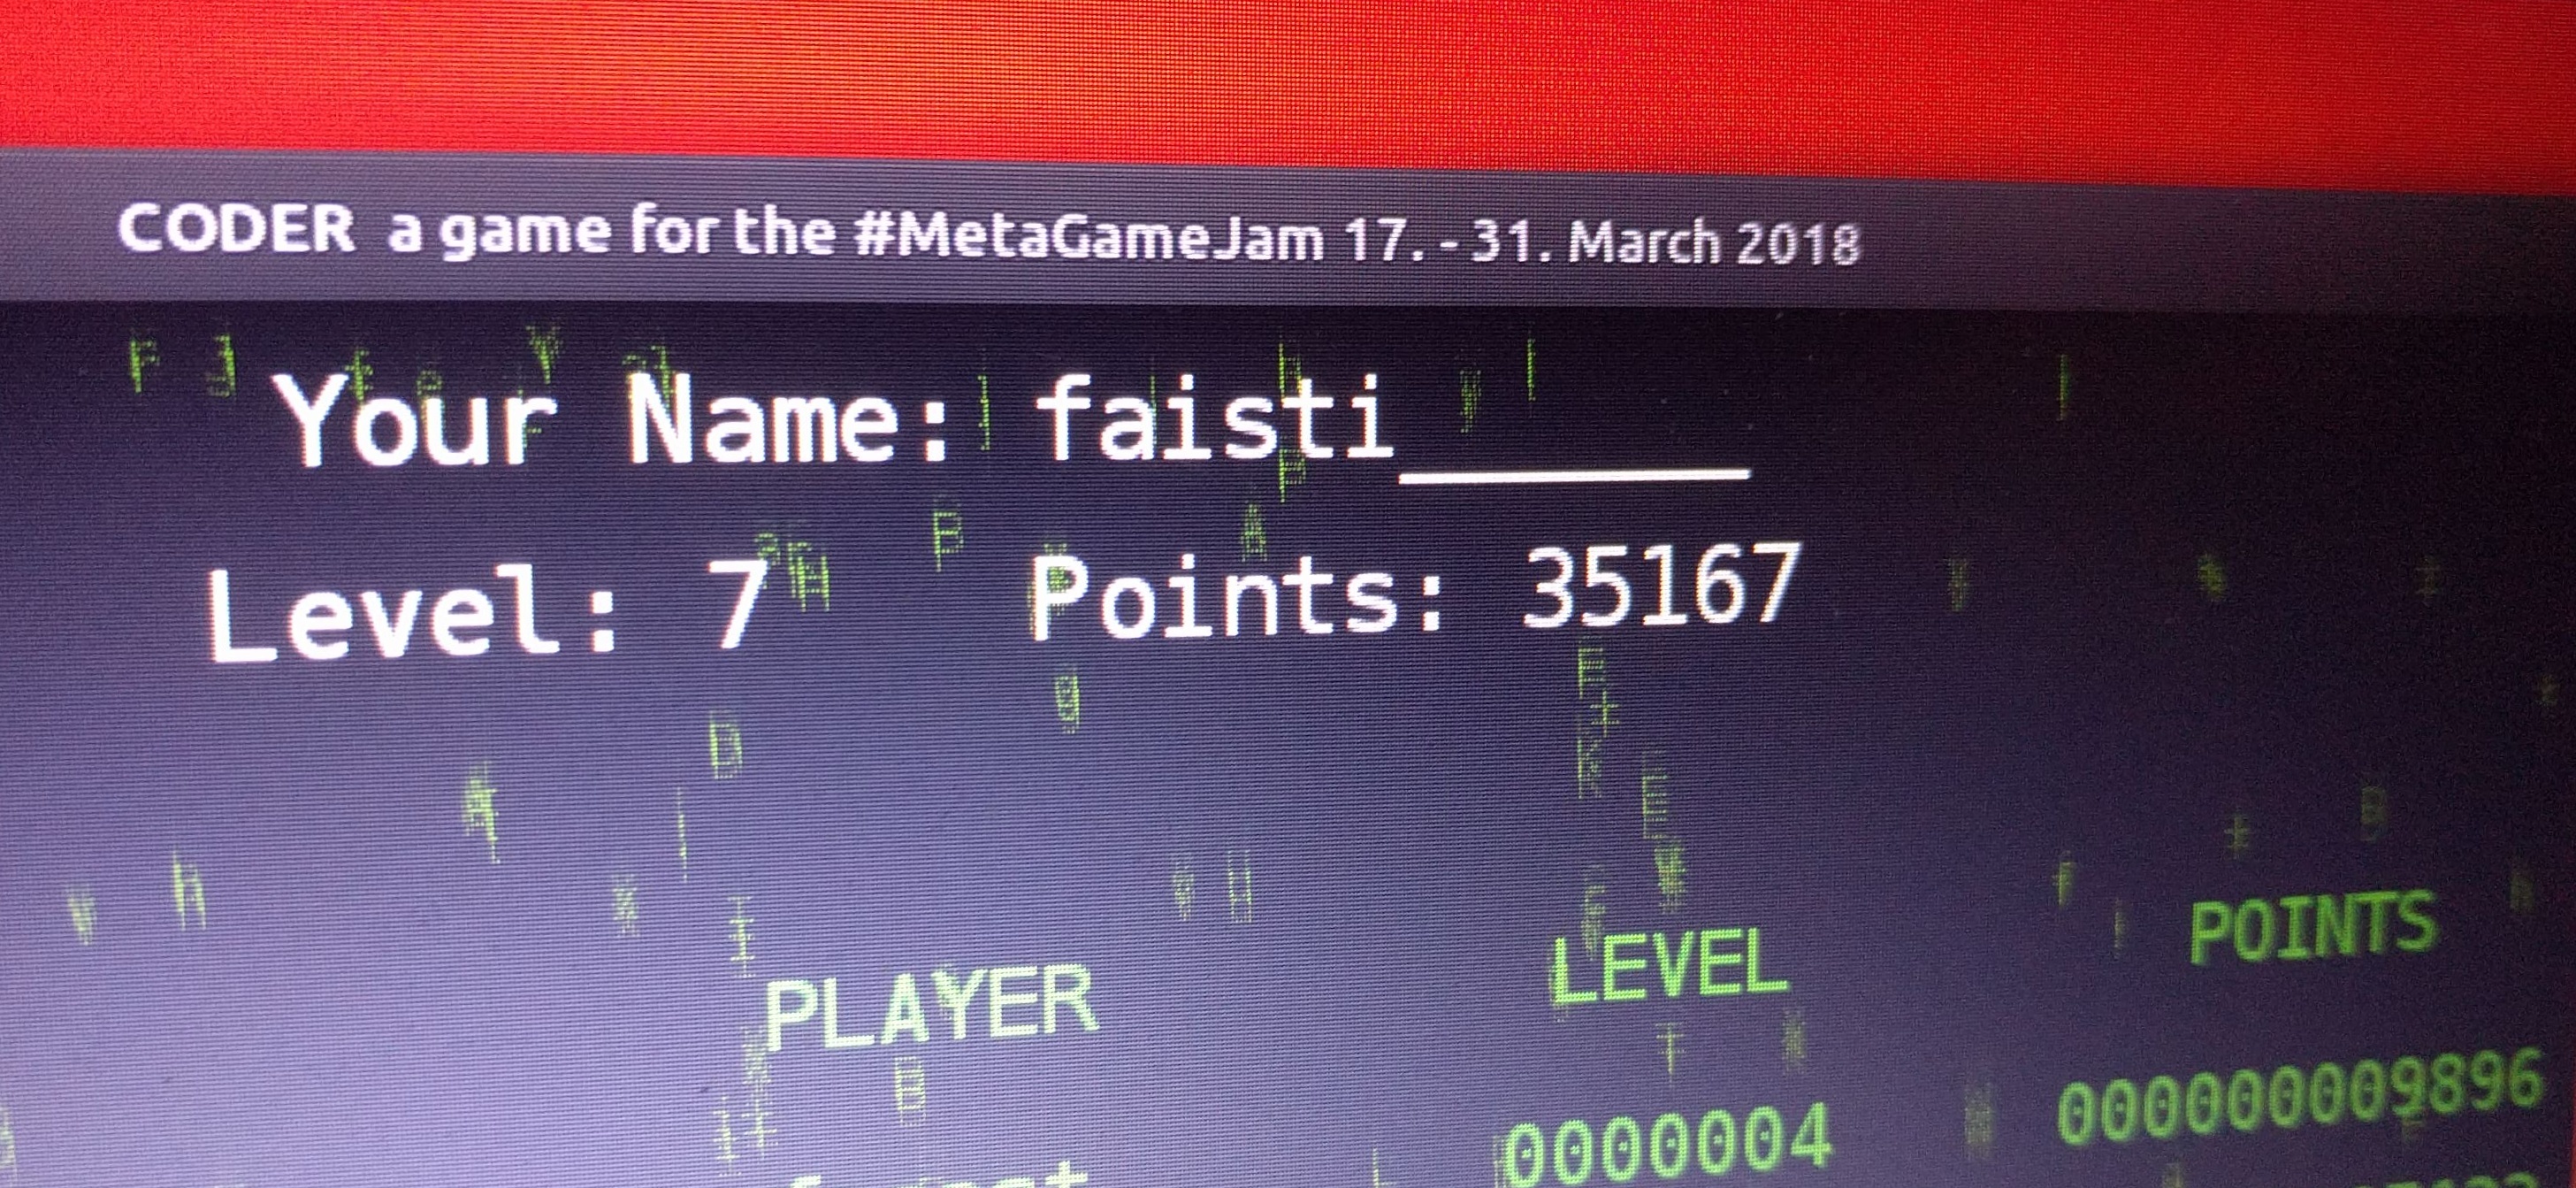 Coding game. Game Coder программа. Meta game Jam. Points for Level of the game.